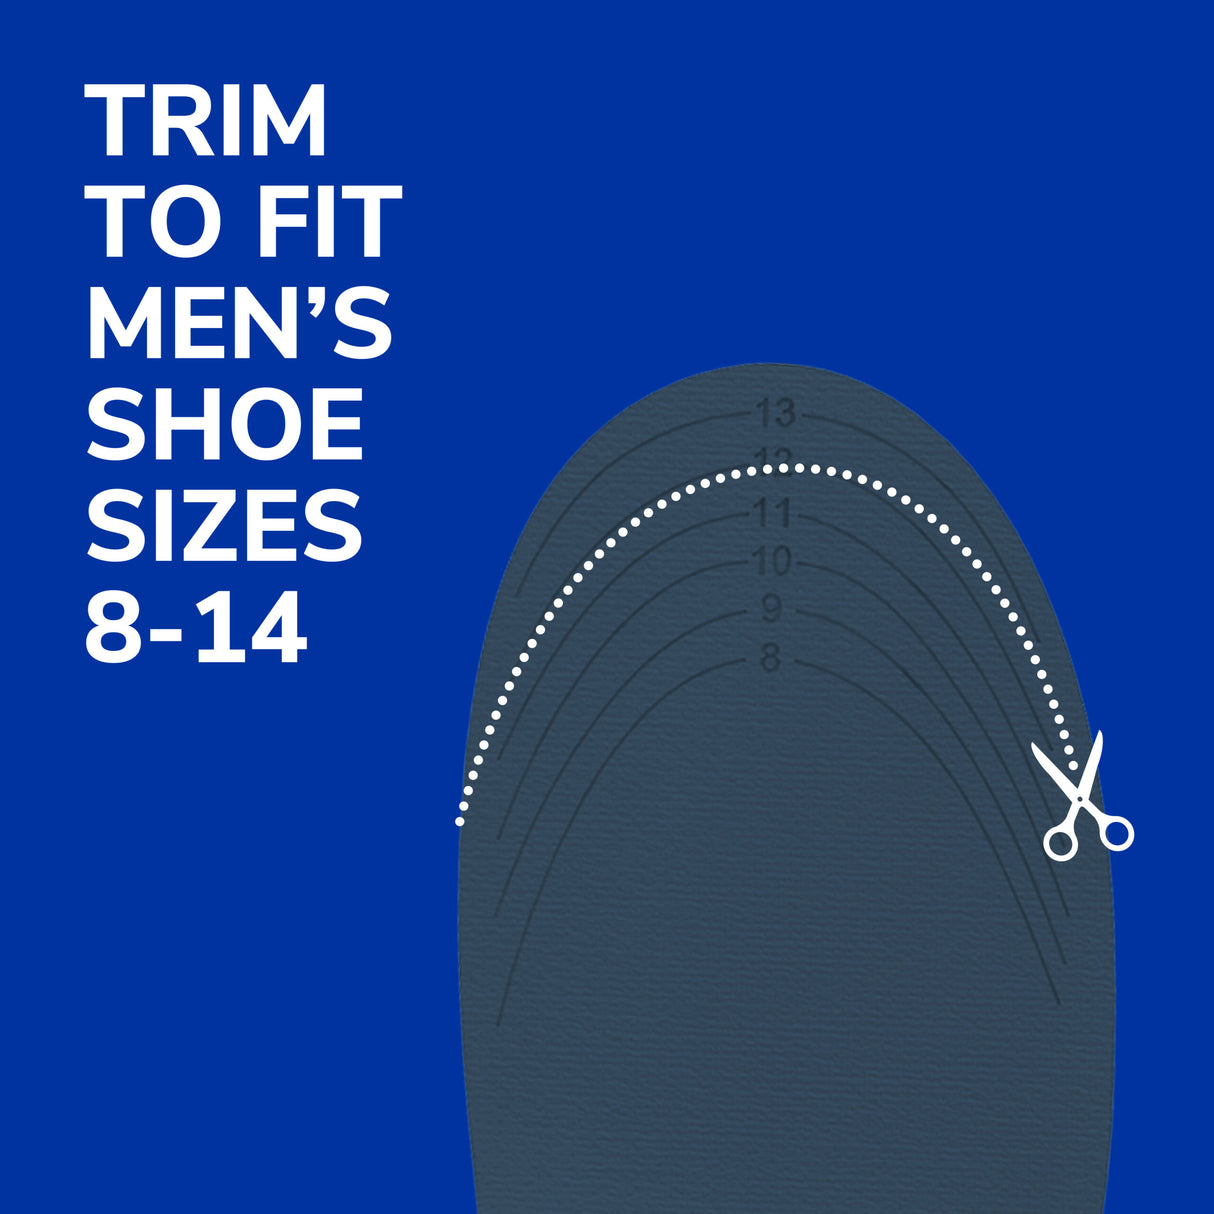 image of trim to fit men's shoe sizes 8-14